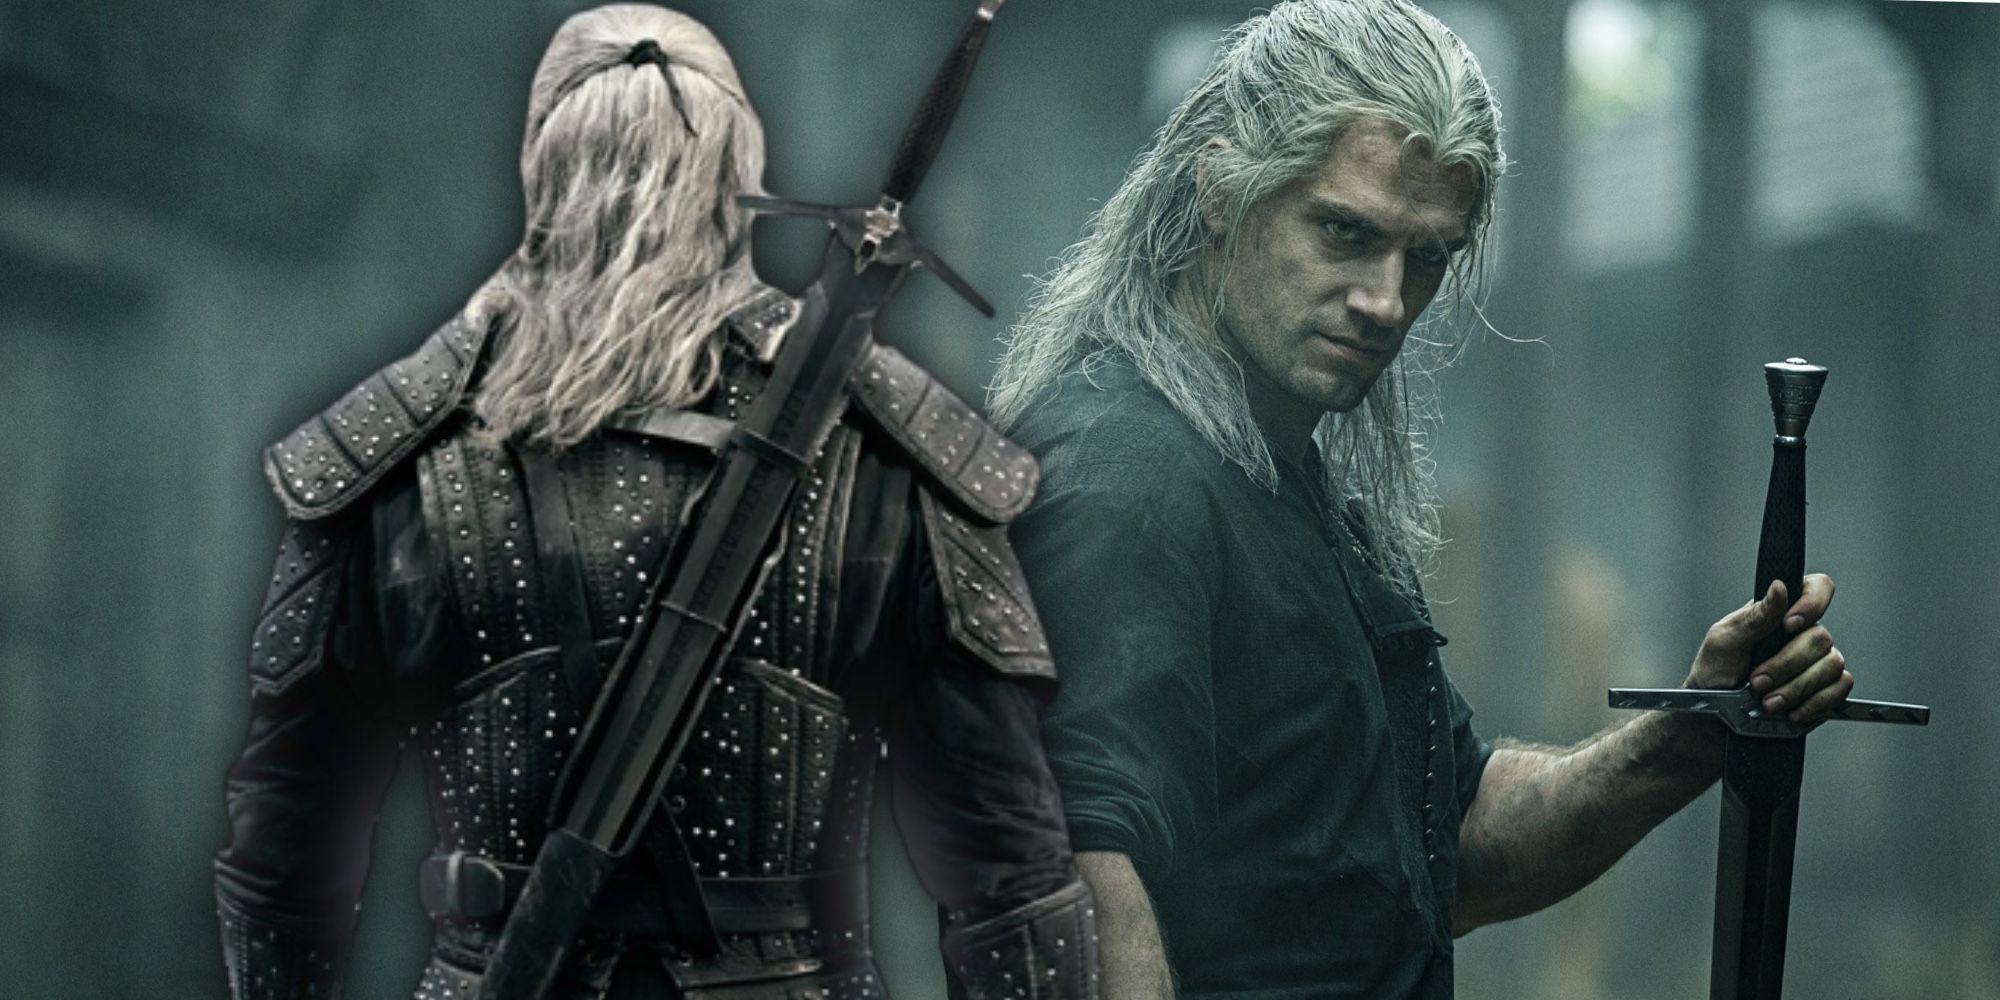 Henry Cavill as Geralt of Rivia in The Witcher on Netflix